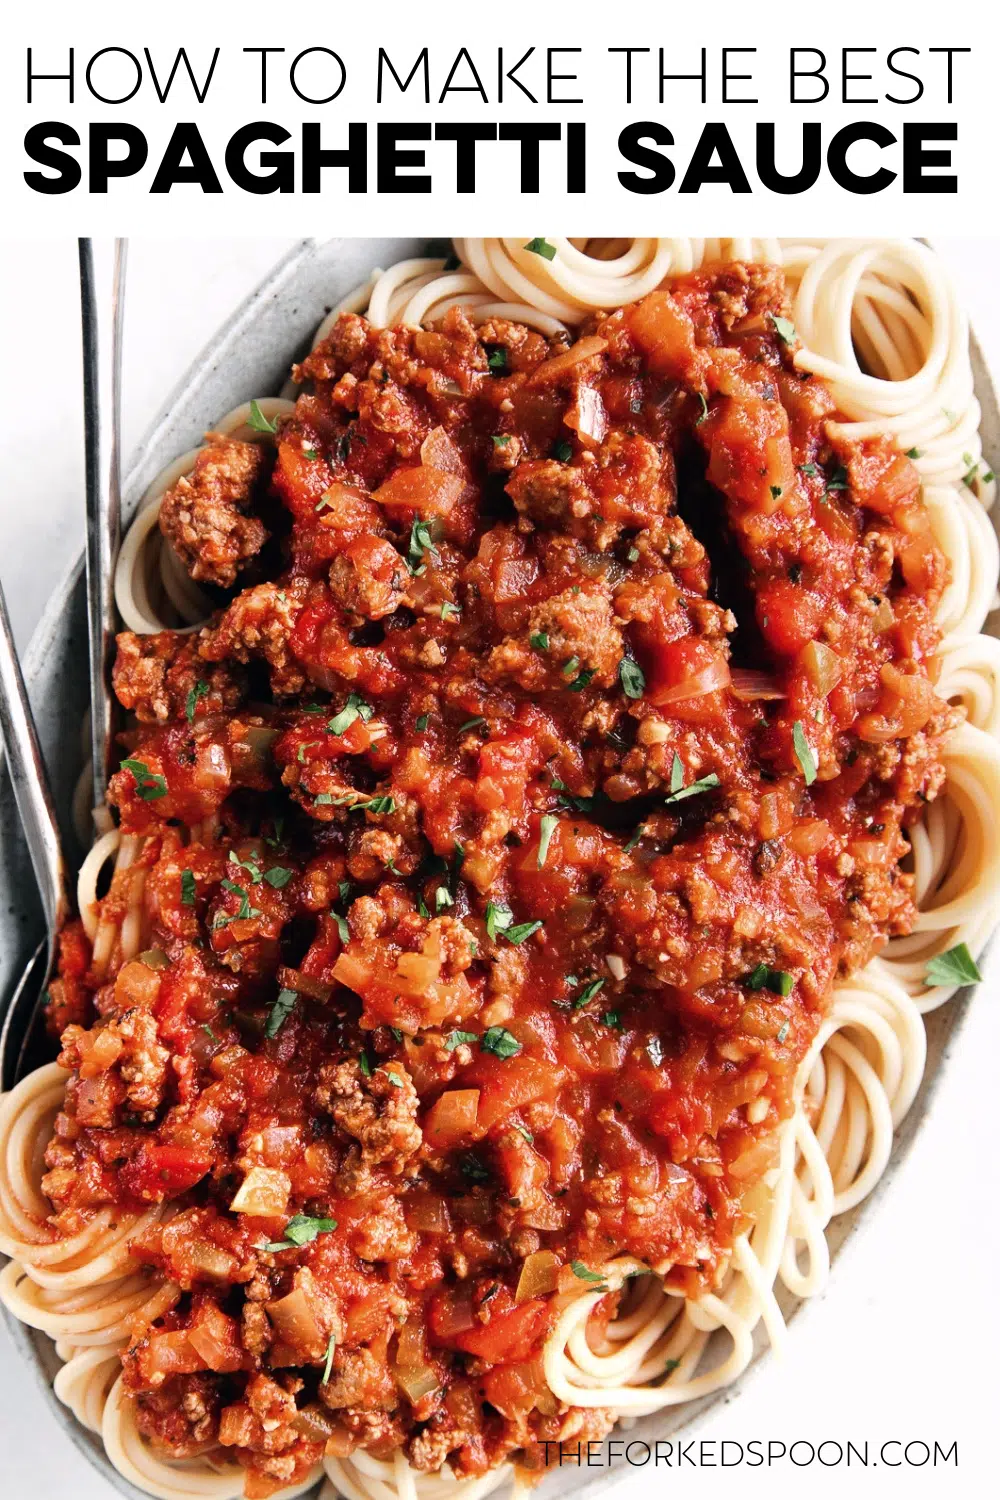 Spaghetti Sauce Recipe - The Forked Spoon